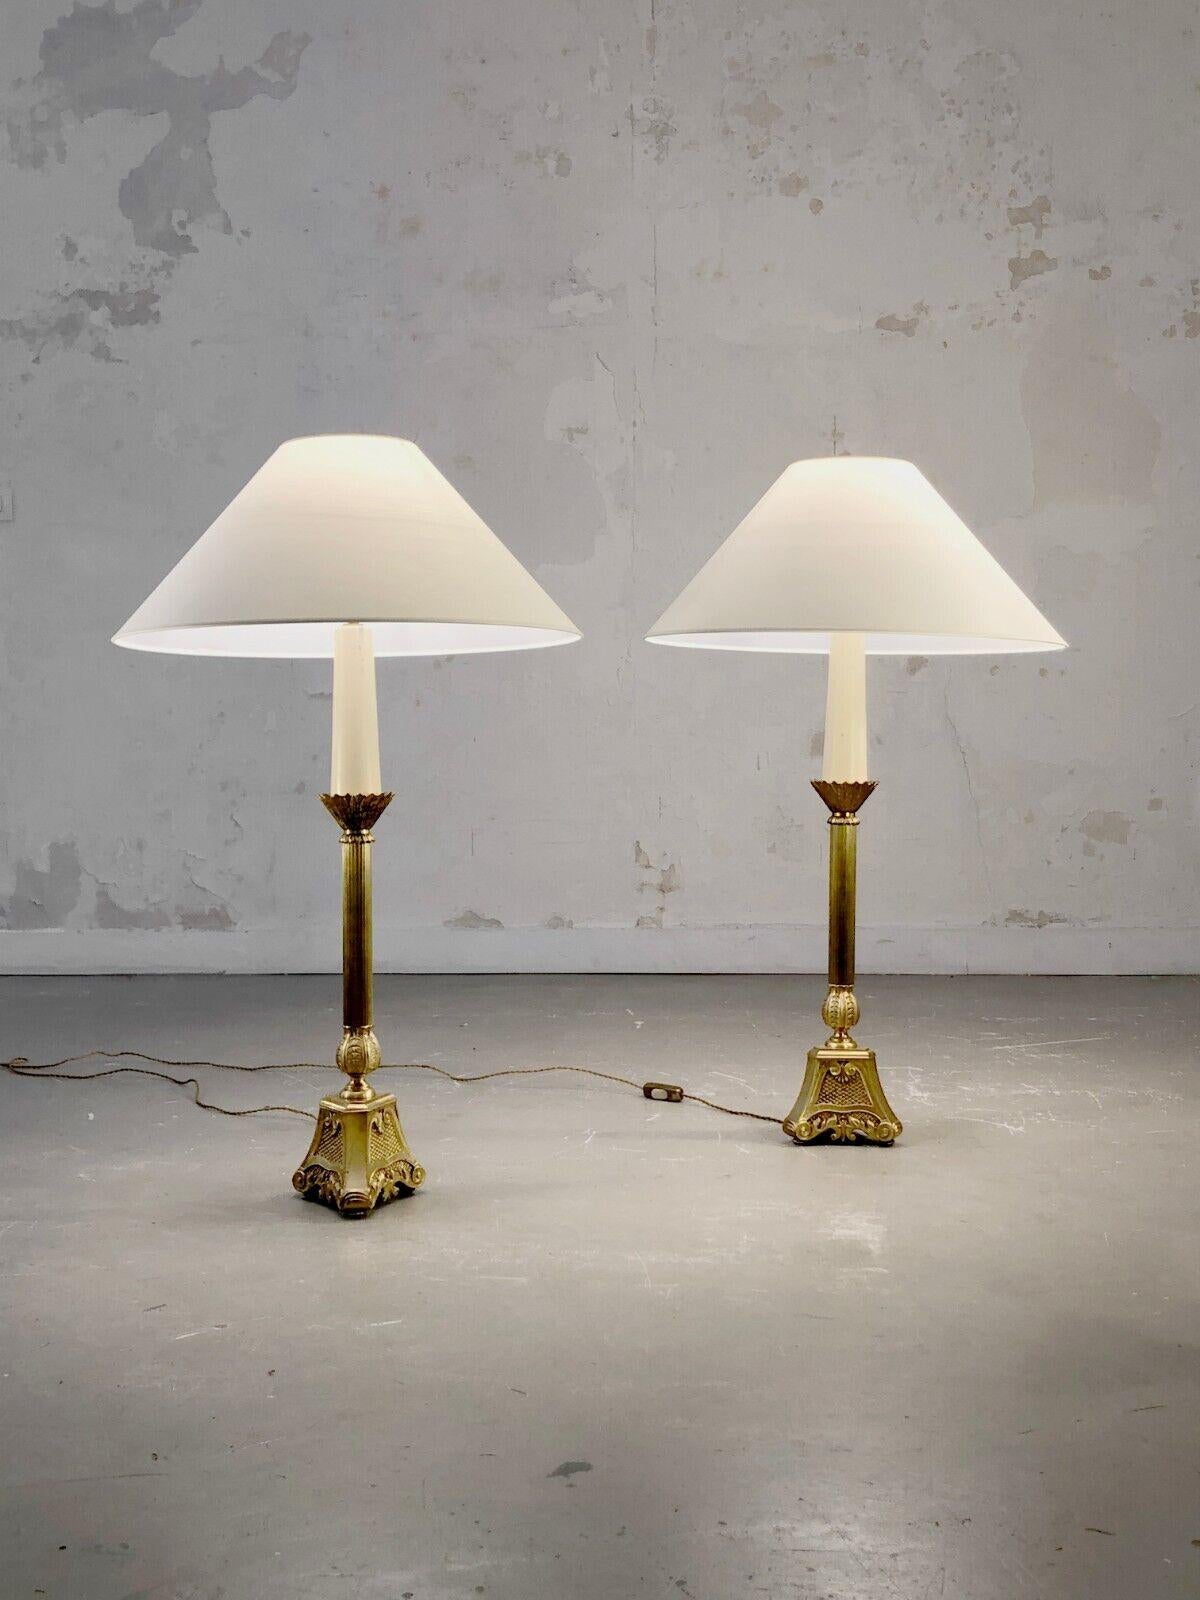 A spectacular and luxurious pair of large table lamps, Neo-classical, Baroque, Empire, with beautiful base in golden bronze, decorated with refined motives. The bases are actually authentic 19th century candlesticks turned into lamps. To be